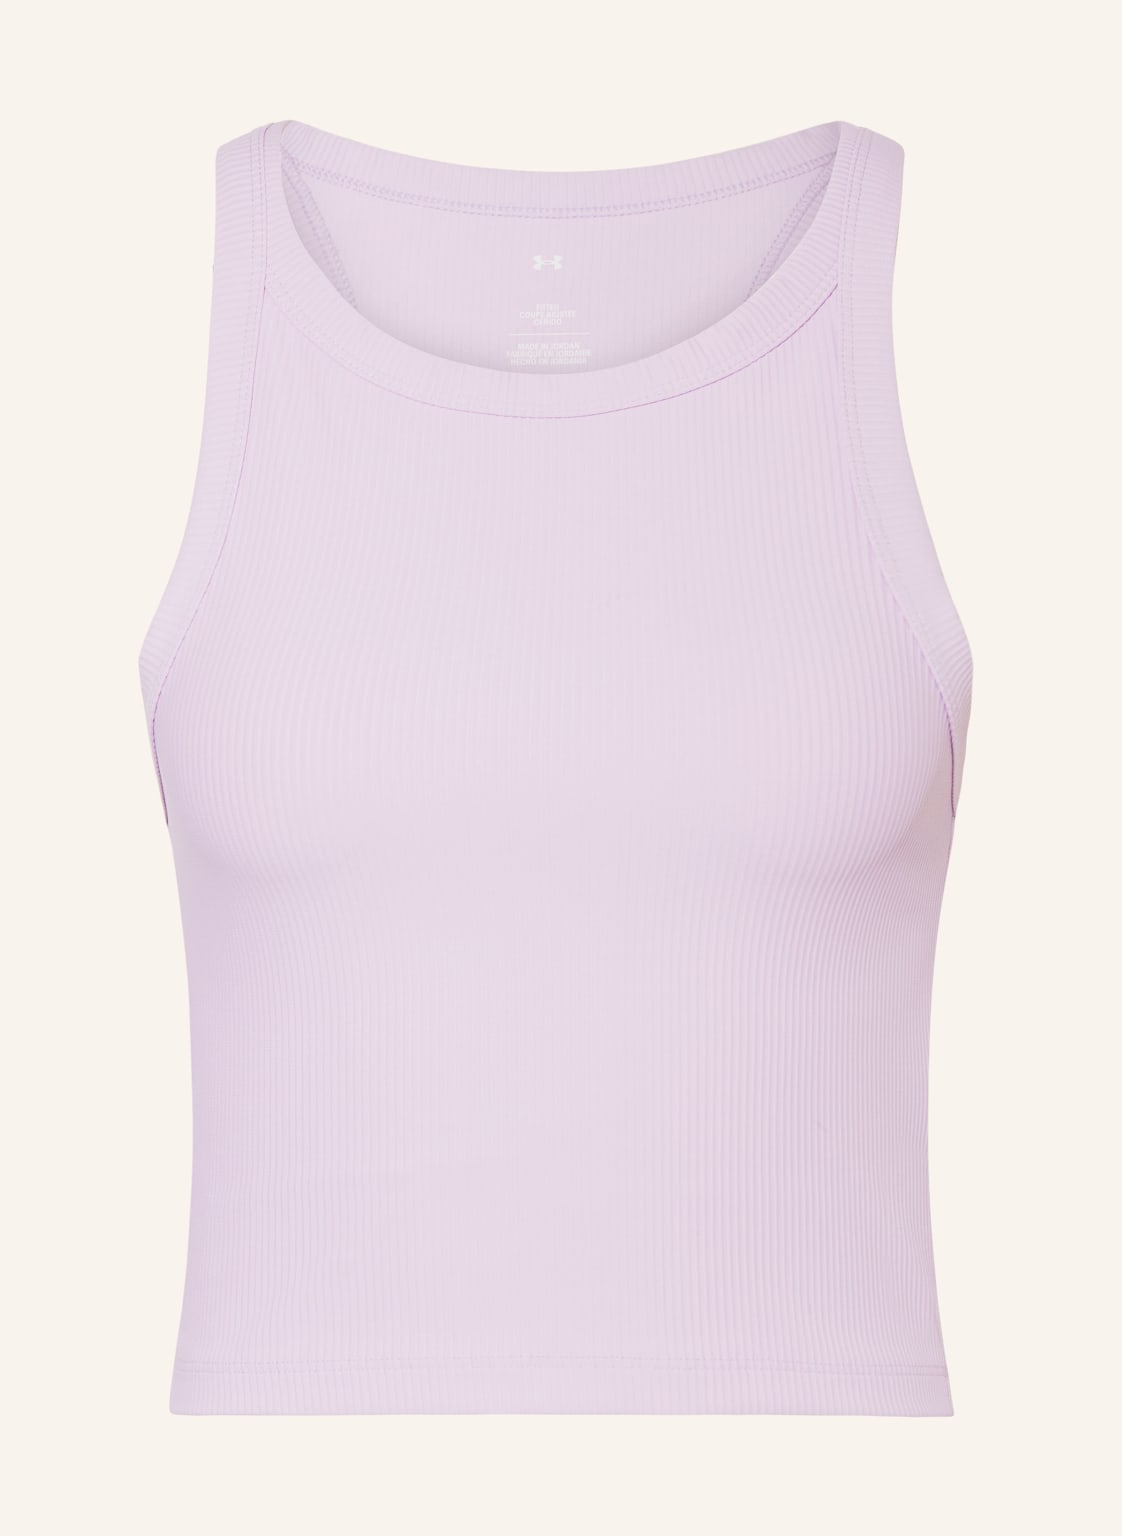 Under Armour Cropped-Top Meridian lila von Under Armour